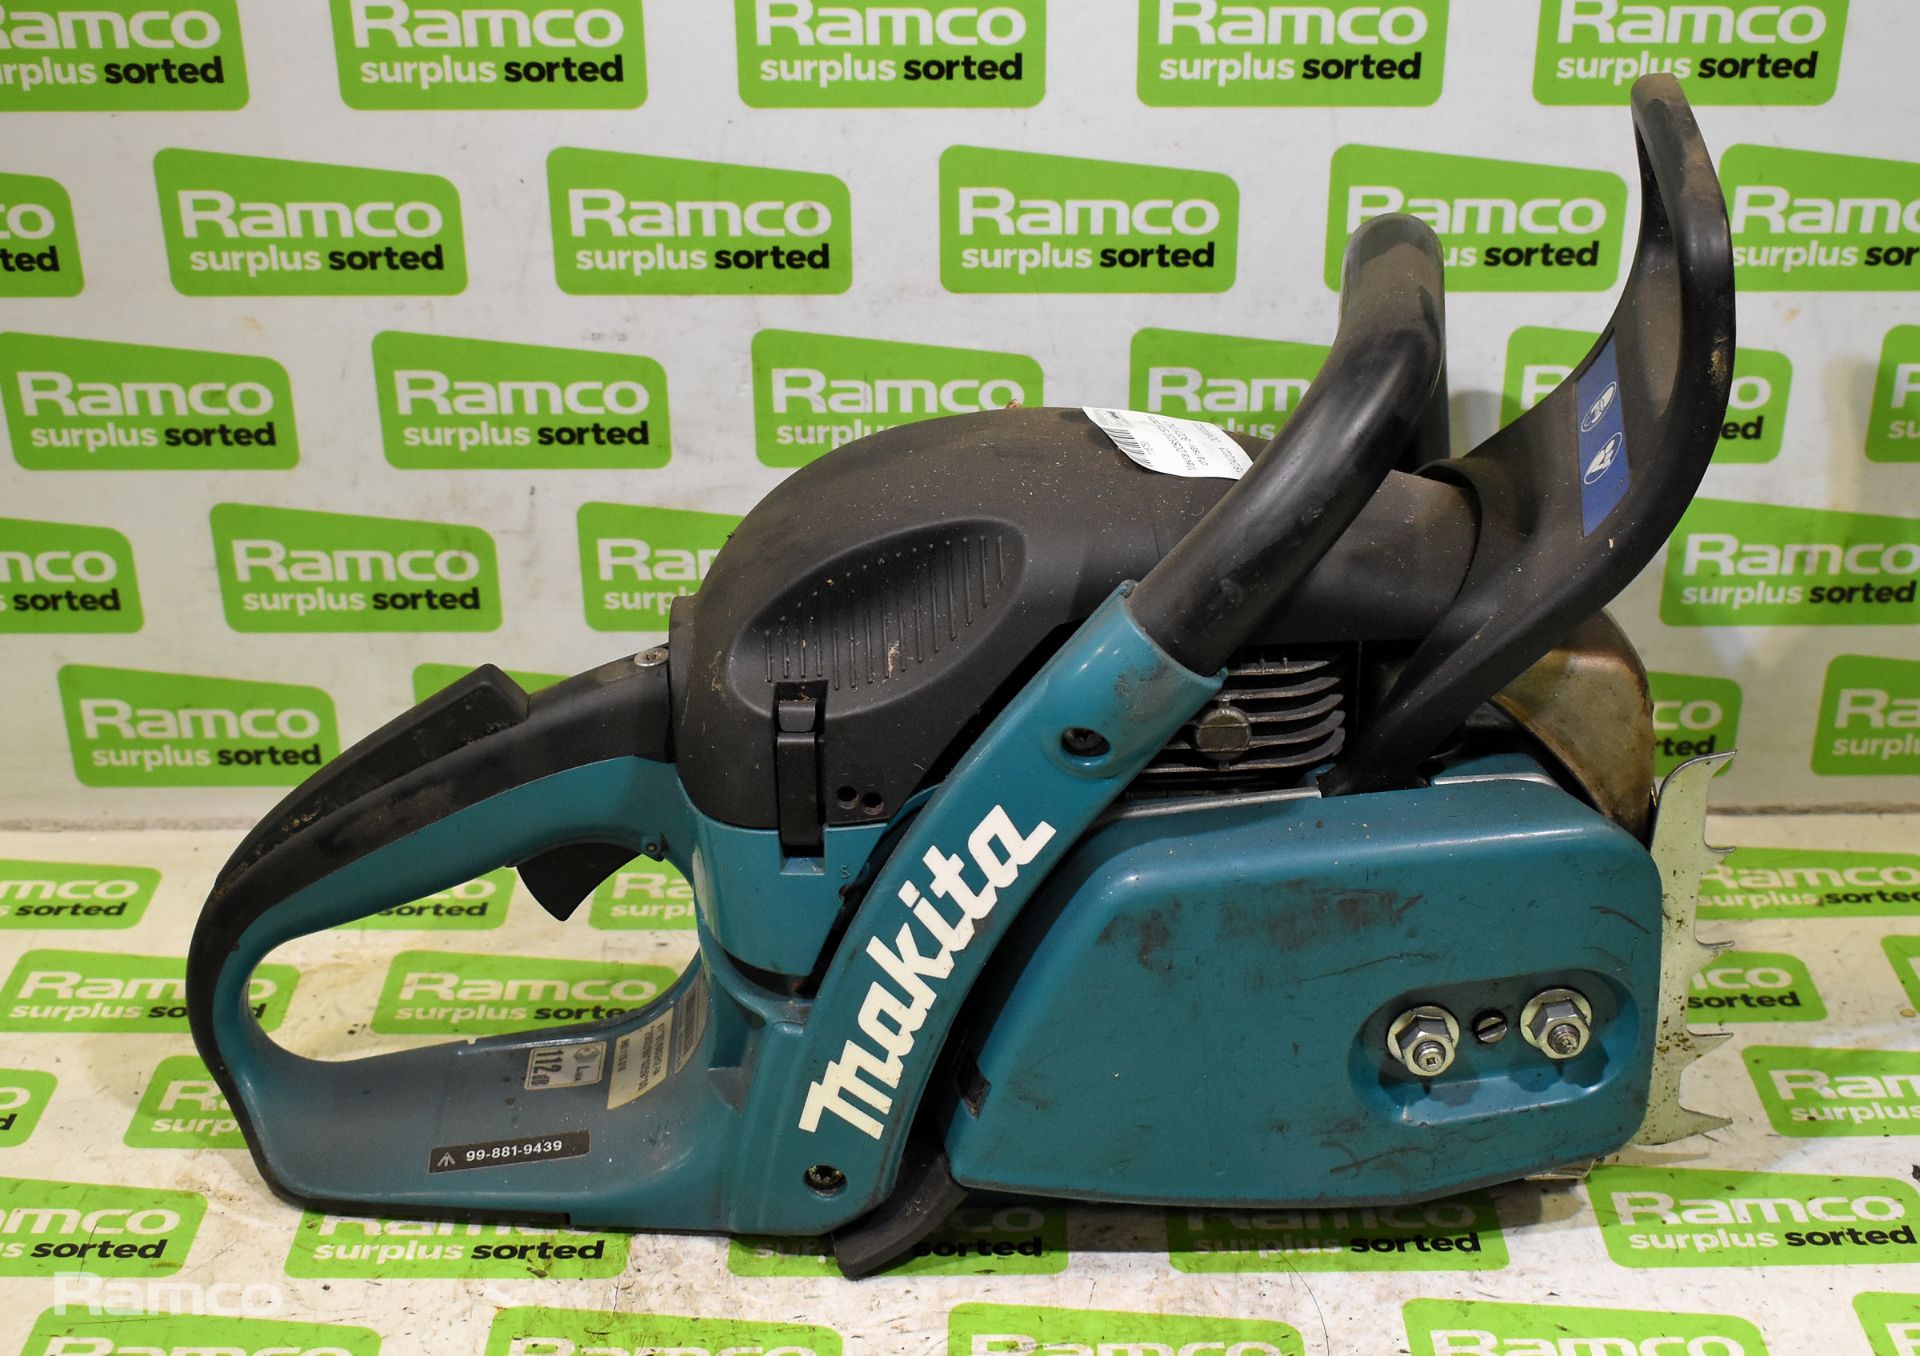 6x Makita DCS5030 50cc petrol chainsaw - BODIES ONLY - AS SPARES & REPAIRS - Image 14 of 33